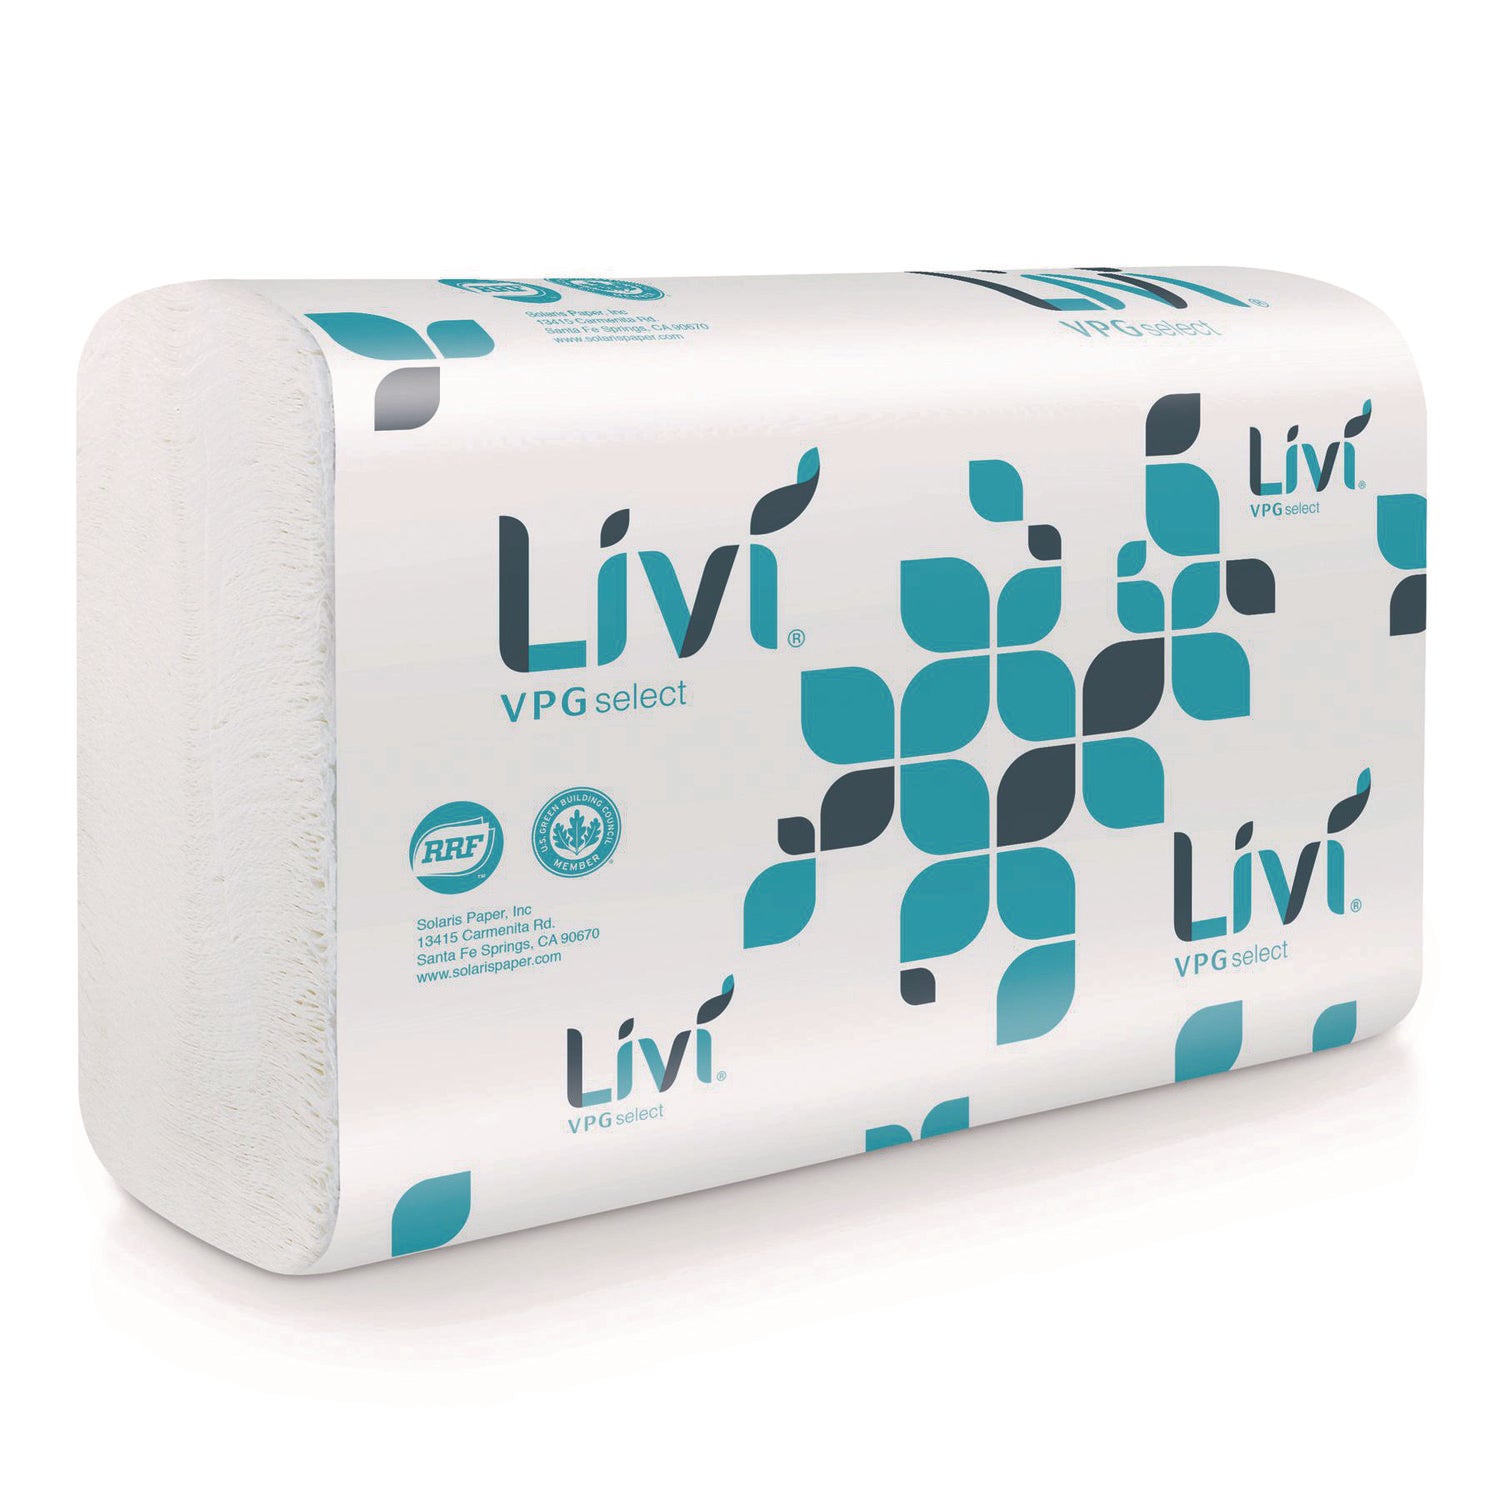 Livi VPG Select Multifold Towel - 1 Ply - Multifold - 9.06" x 9.45" - White - Virgin Fiber - Soft, Embossed, Absorbent, Eco-friendly - For Office Building - 250 Per Pack - 16 / Carton - 1